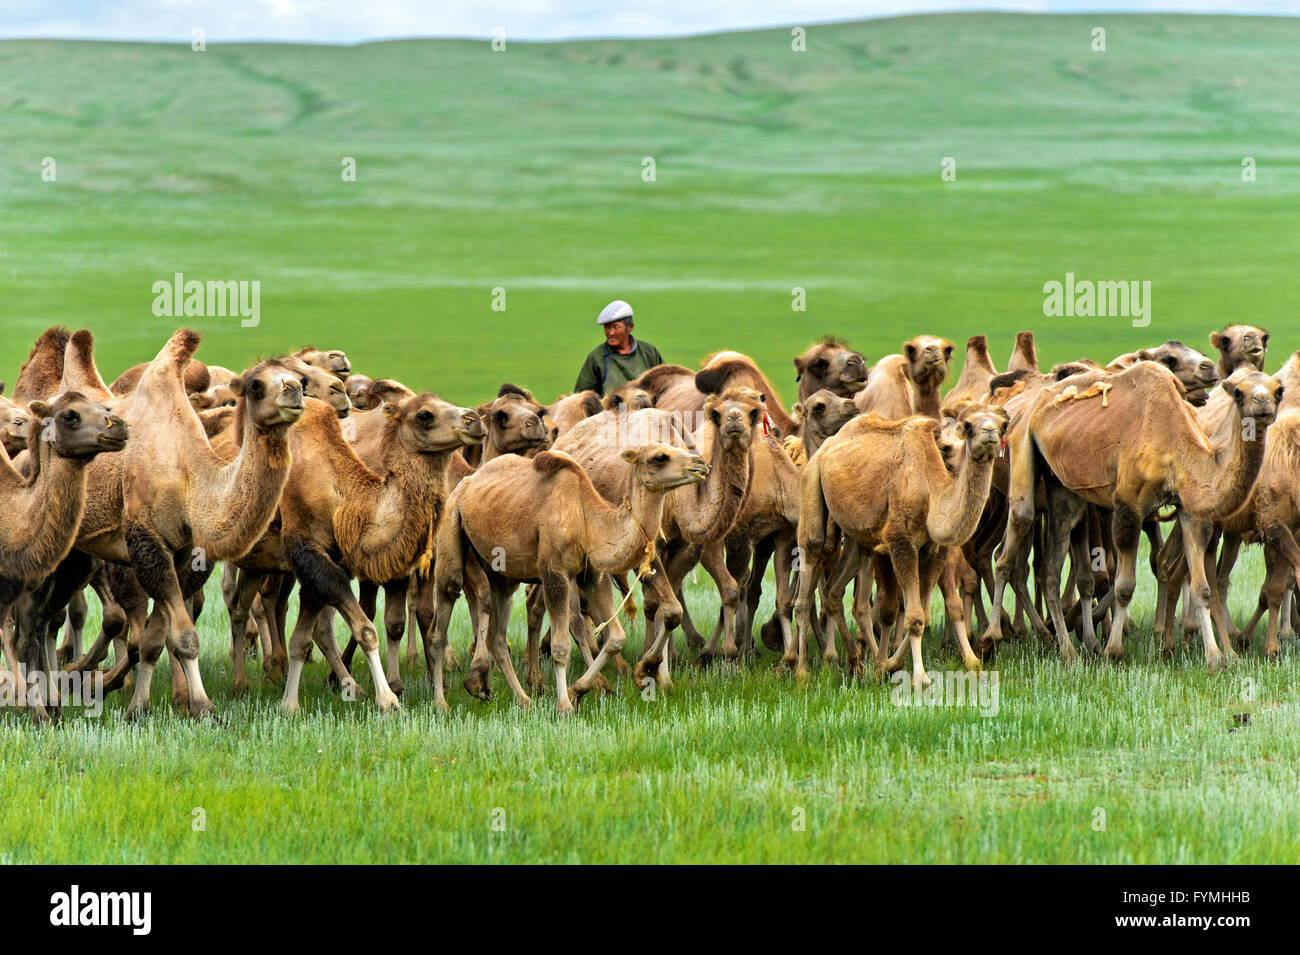 Herd of Bactrian camels (Camelus bactrianus) roaming in the Mongolian steppe, Mongolia Stock Photo